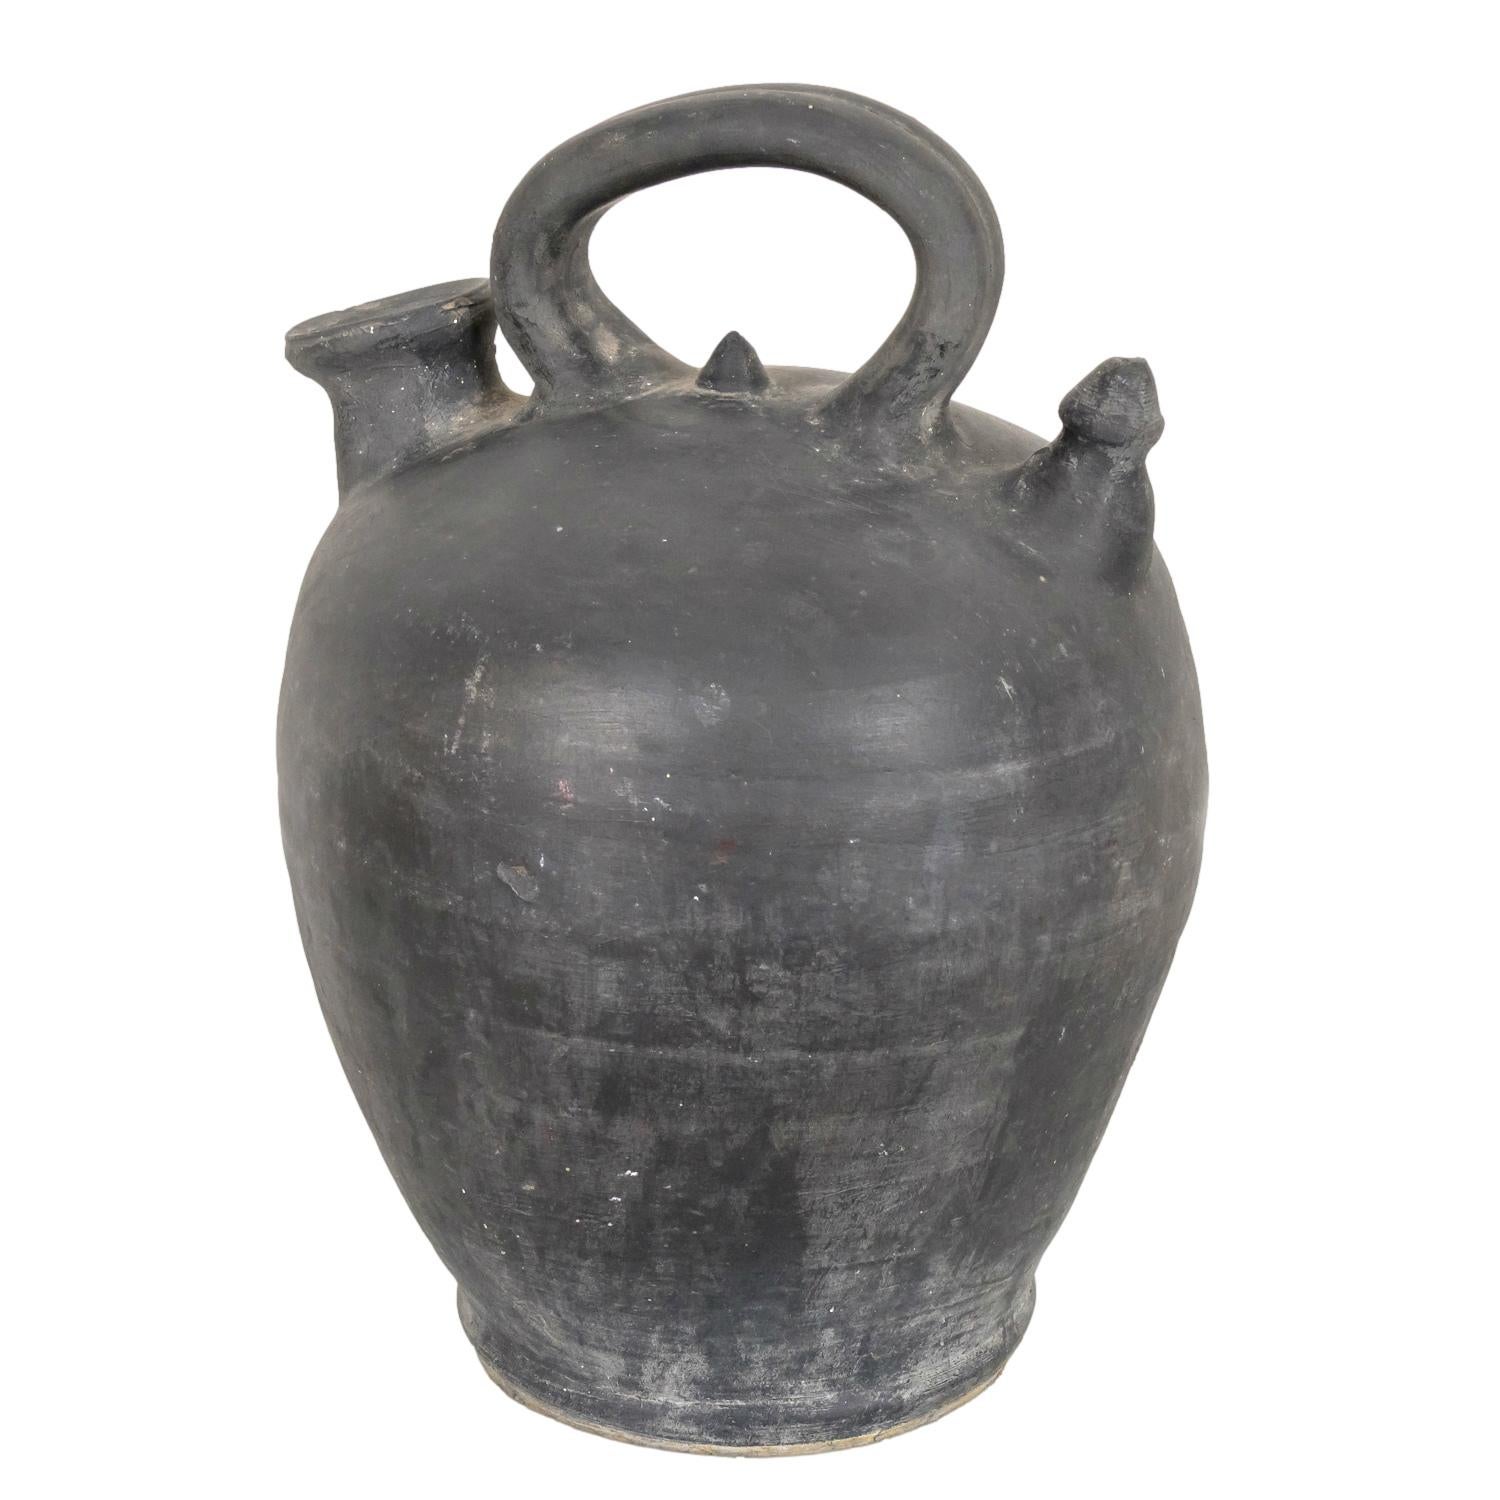 A 19th century barro negro or black clay botijo, hand made in the village of Verdú in the Catalan region of Spain, circa 1890s. This beautiful utilitarian pot, with its wide belly, top handle, and one mouth where it's filled and one mouth called a